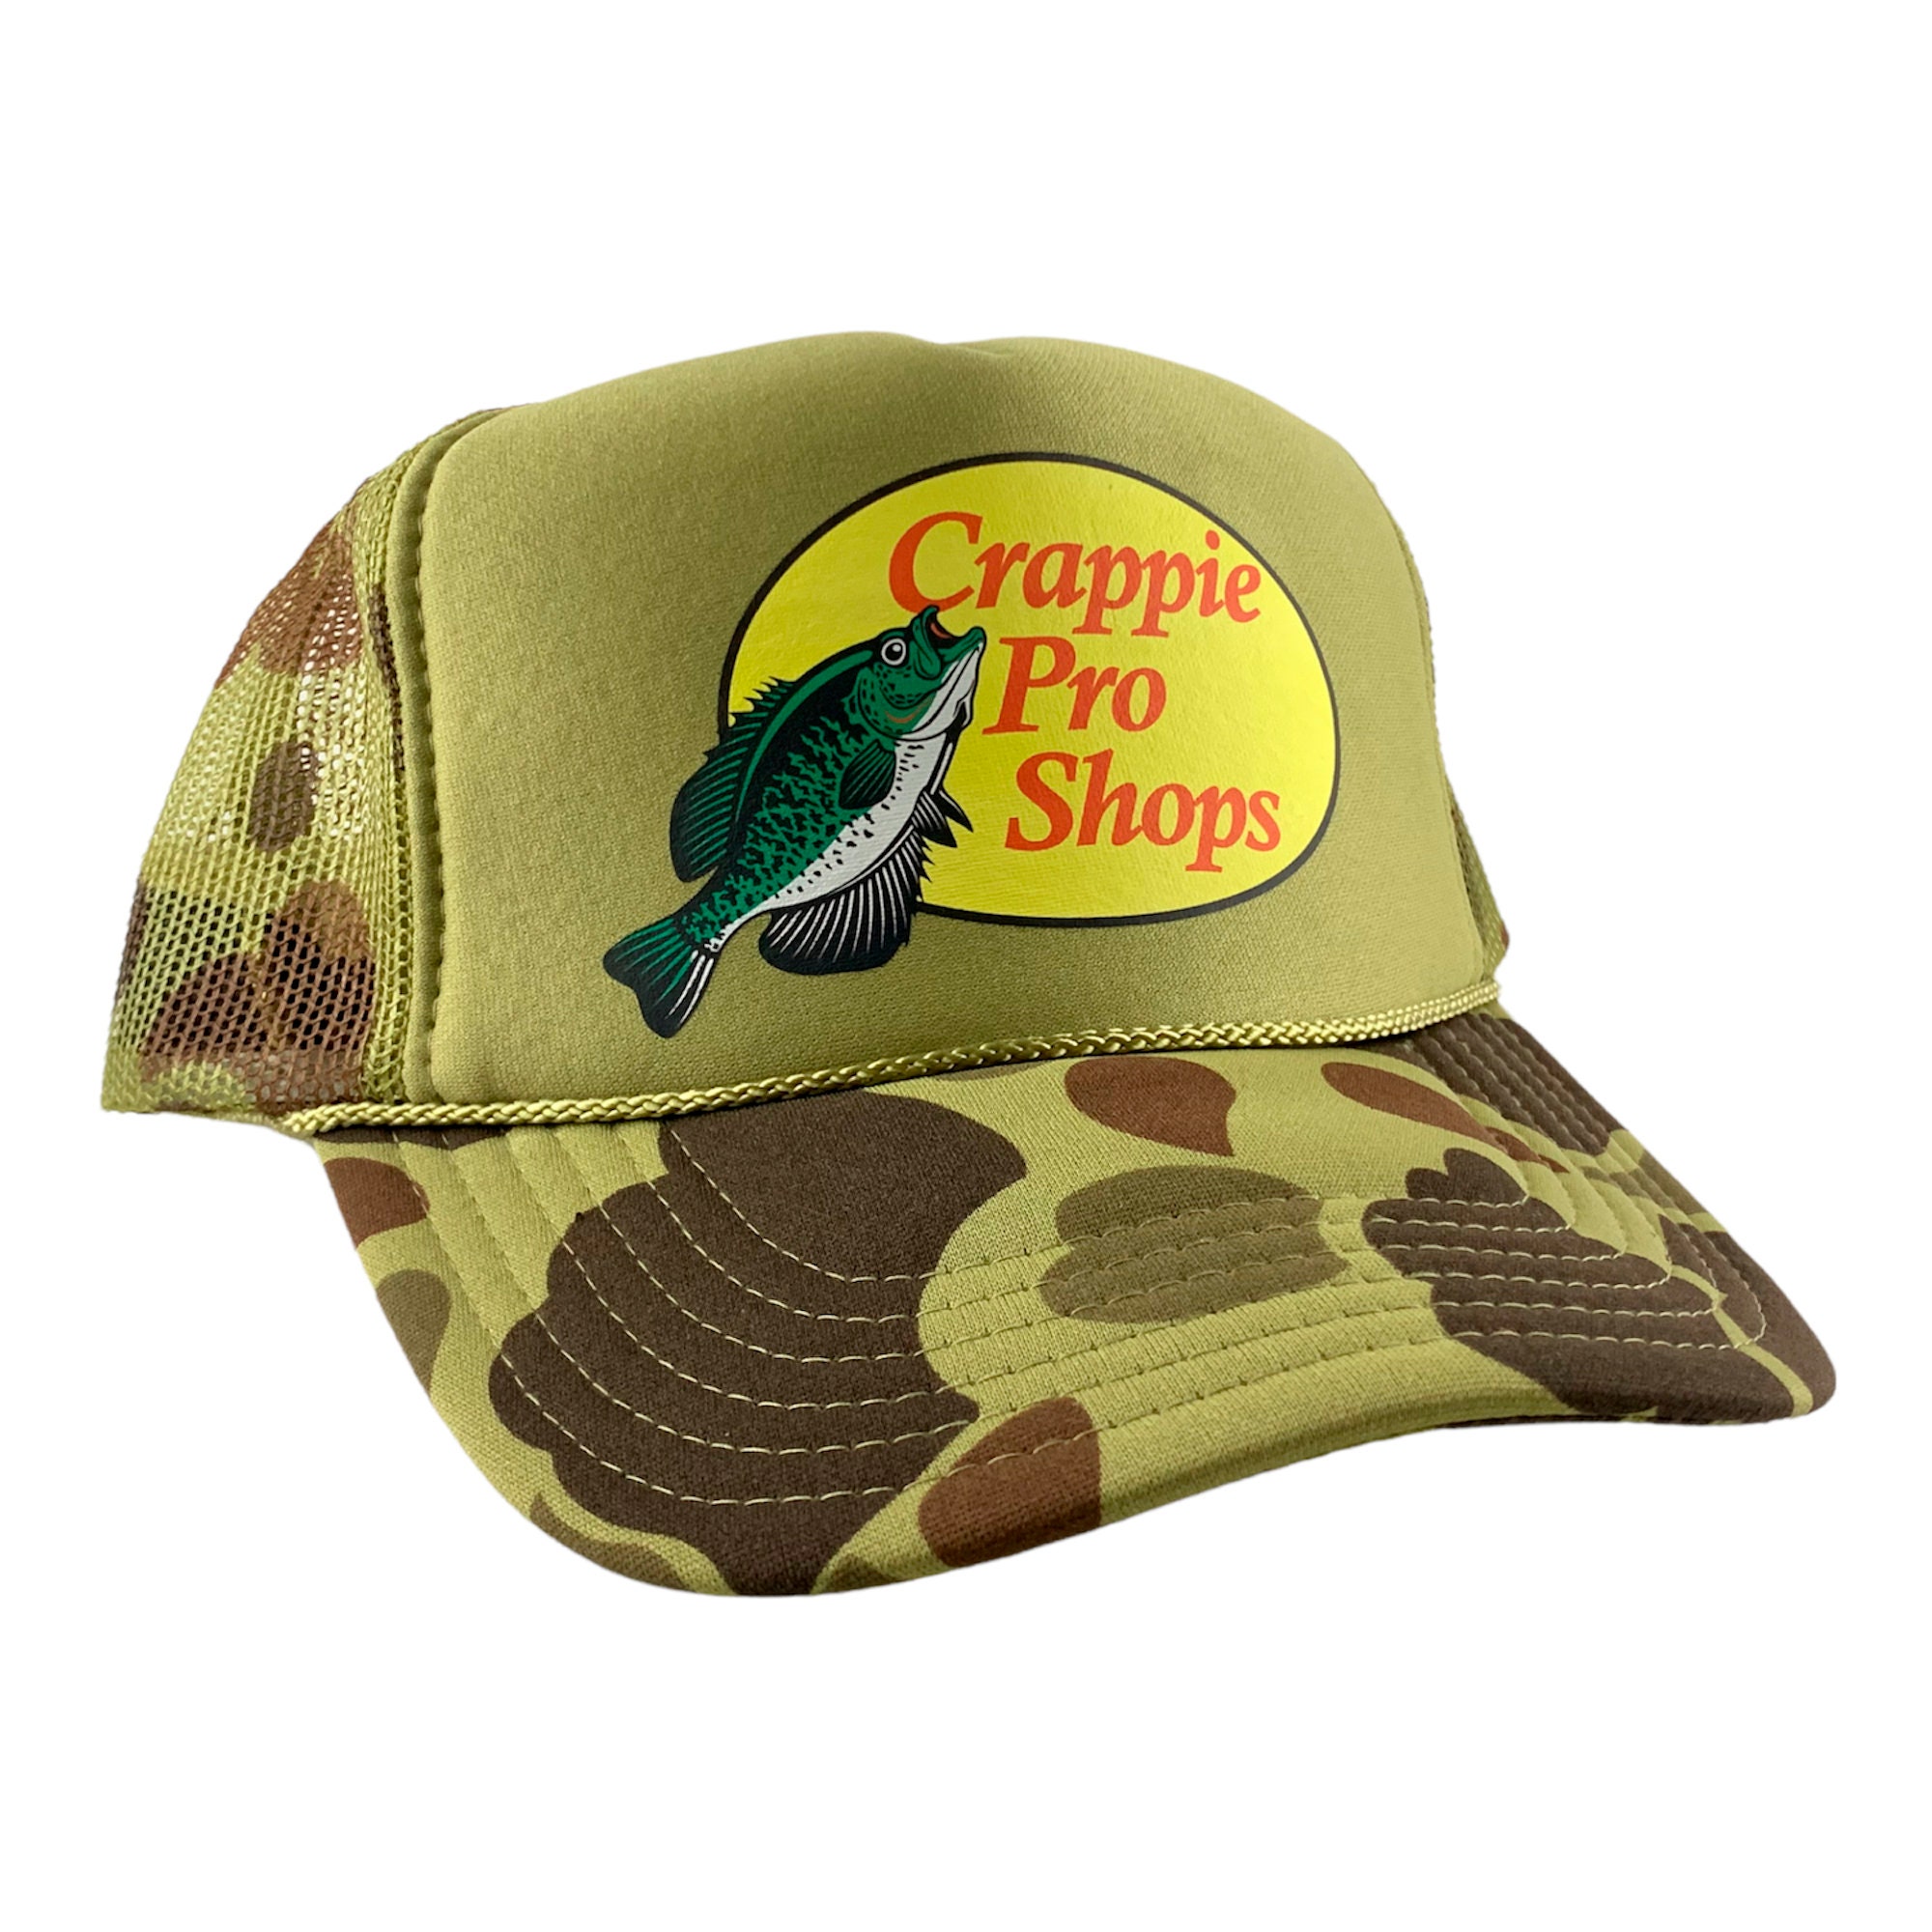 Crappie Pro Shops Hat, Trucker Hat, Fishing Hat, Father Gift, Gift